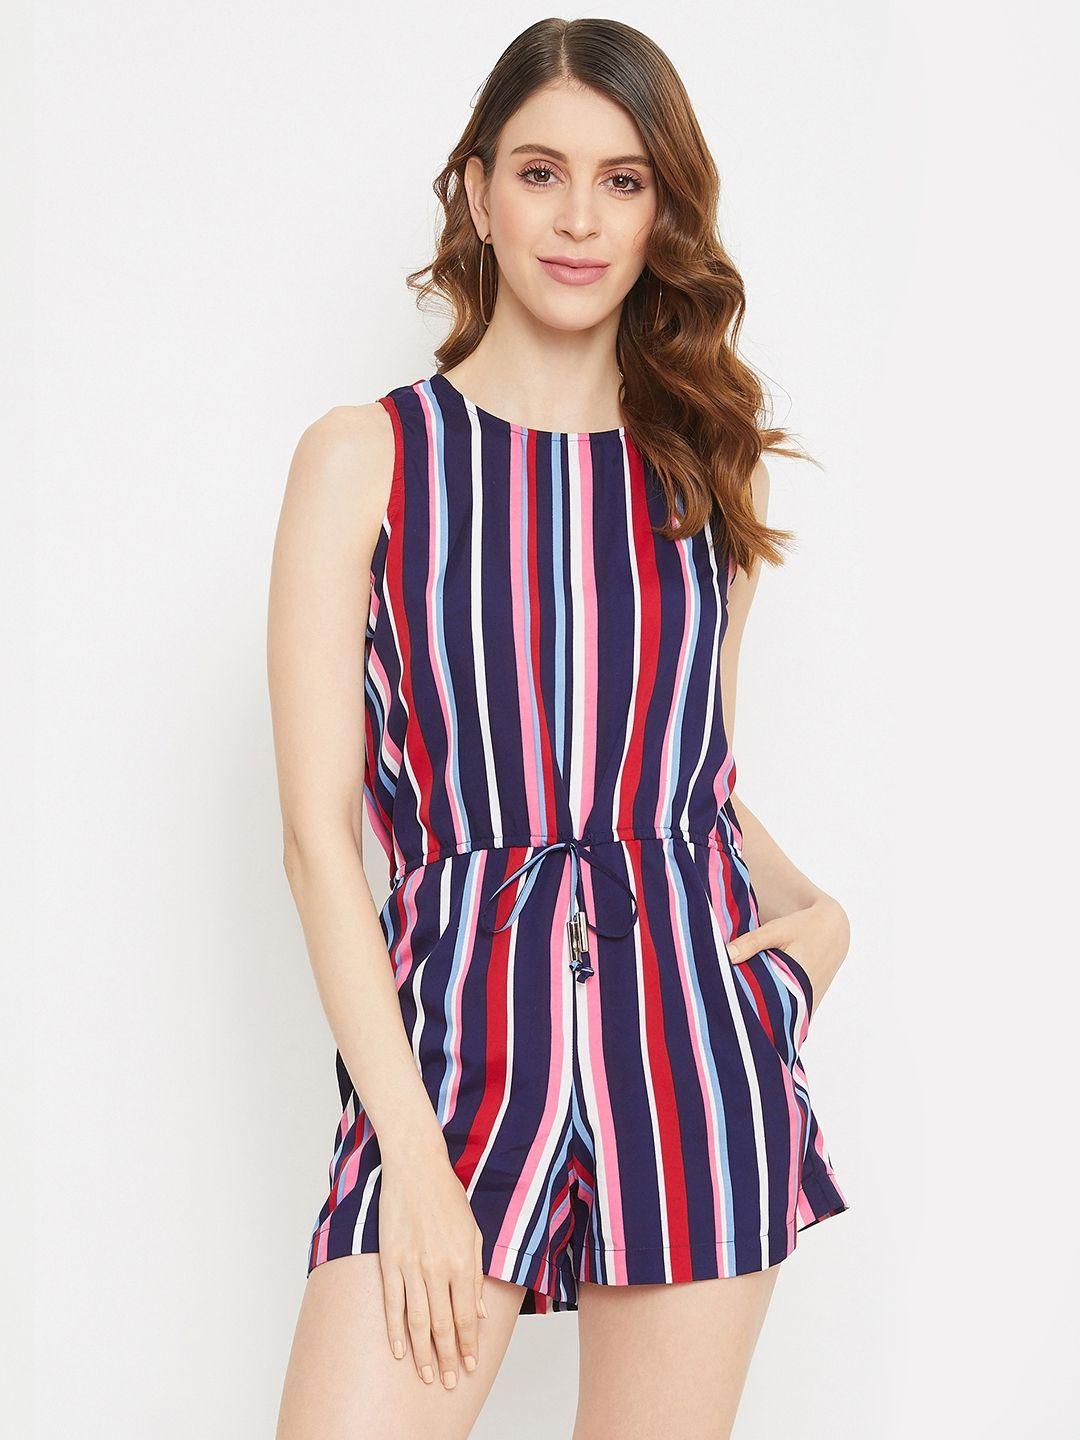 purys women navy blue & coral striped playsuit